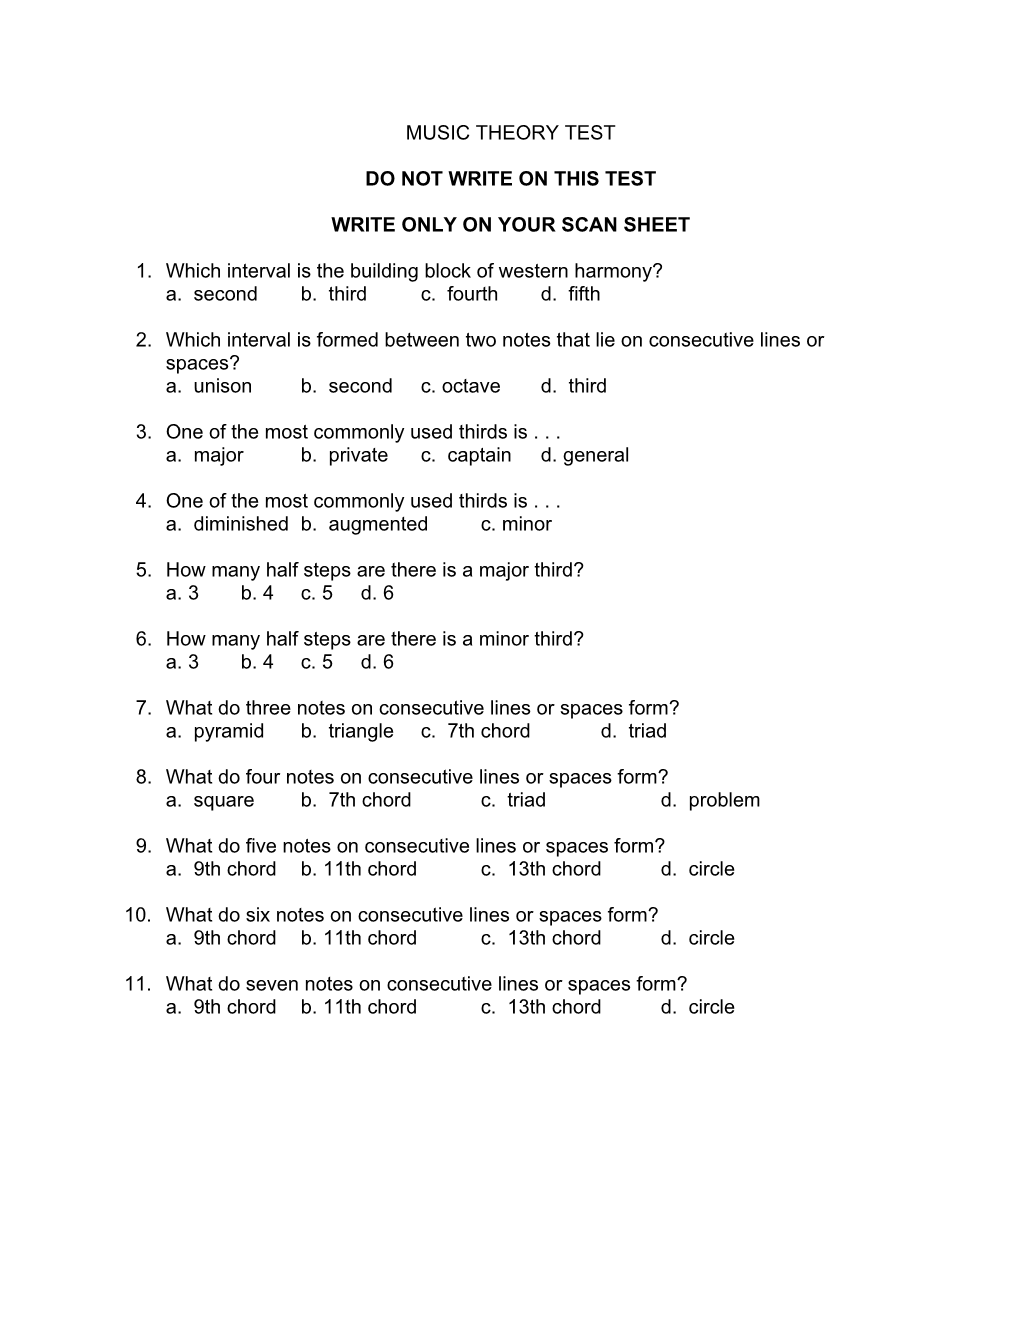 Do Not Write on This Test